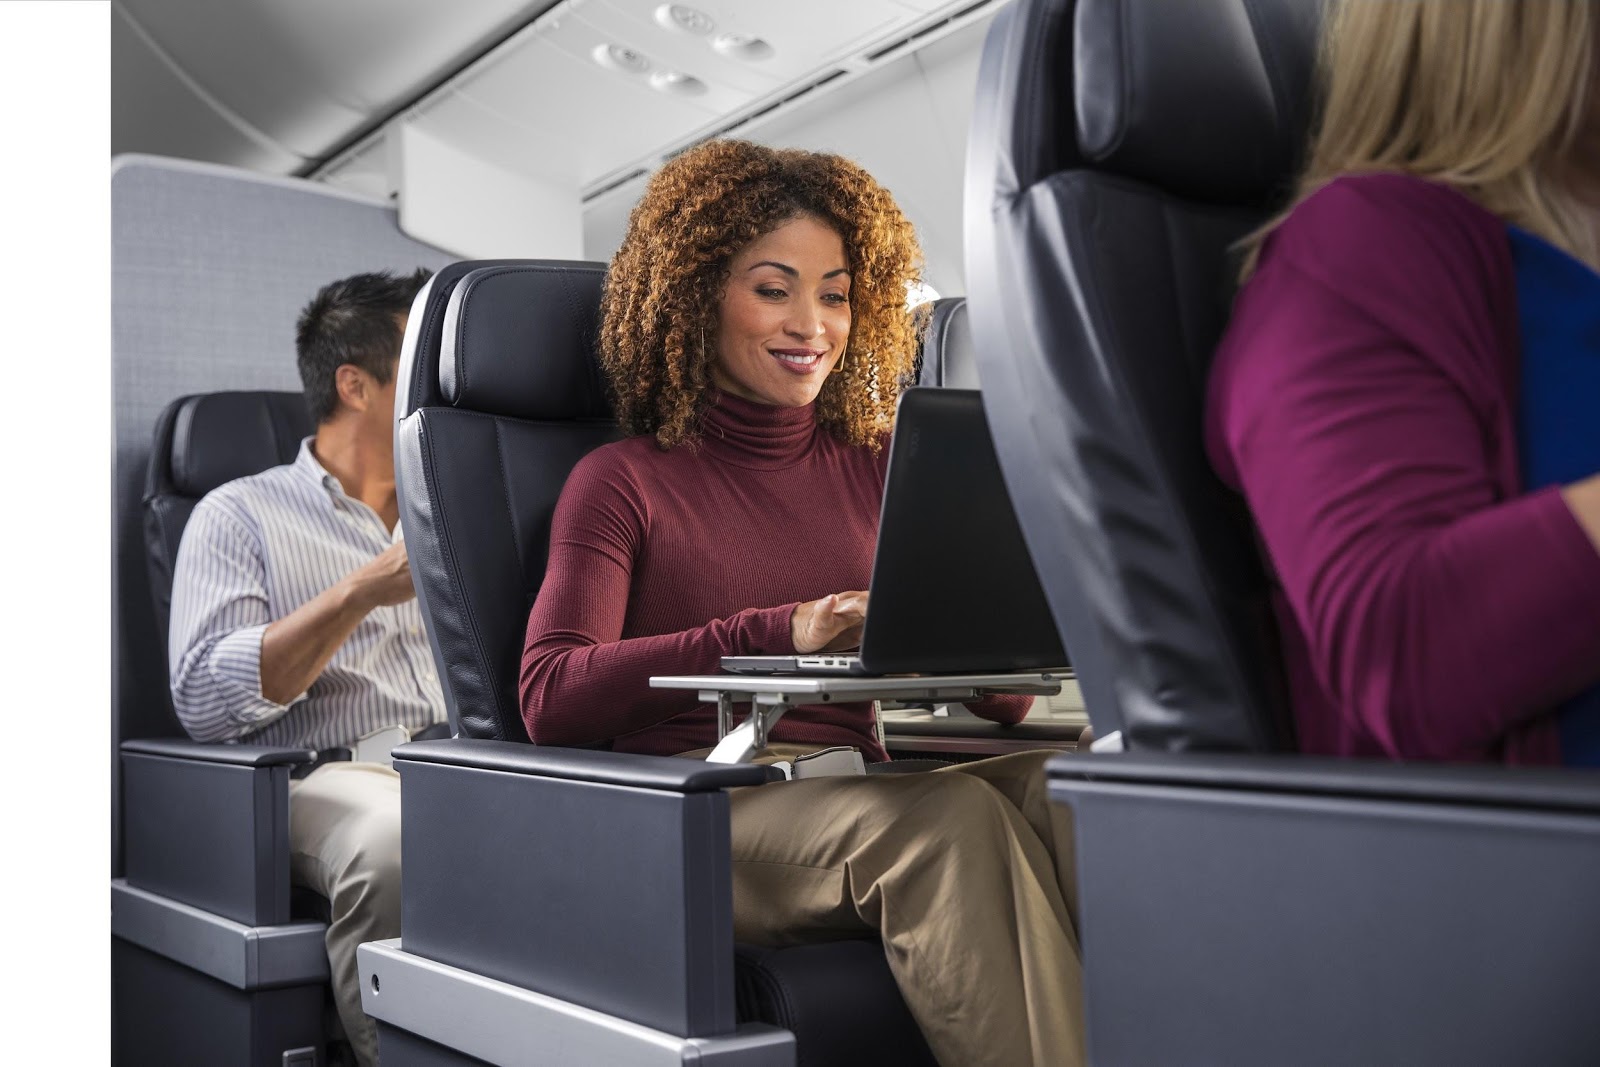 How To Get To Summit21: Here’s Three Reasons Why You Should Fly With American Airlines